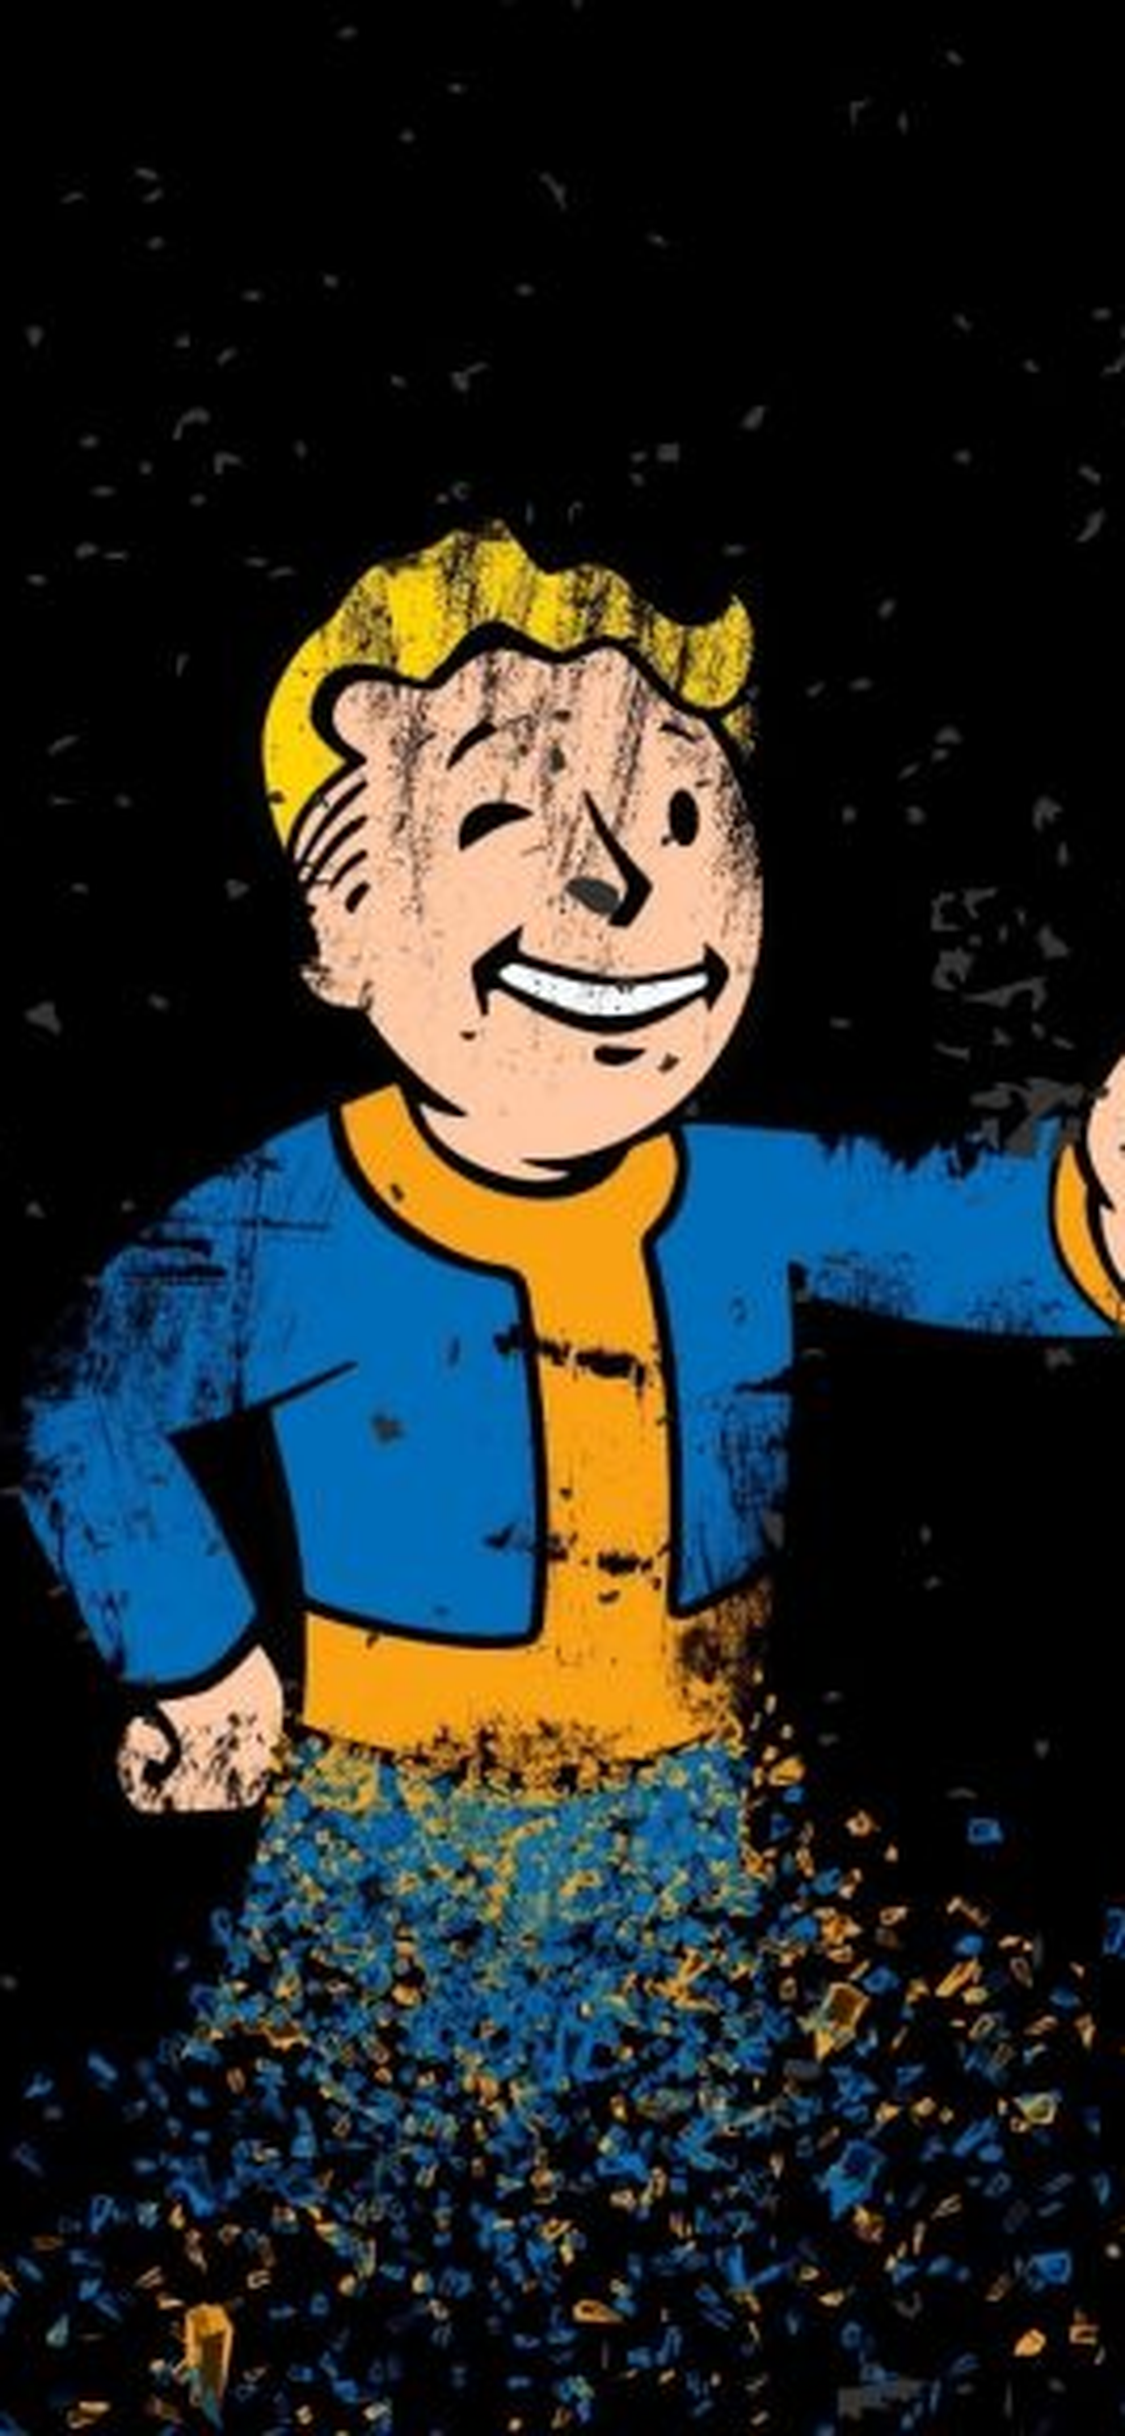 Download Fallout 4 Vault Boy For Iphone X Wallpaper - Fallout Wallpaper 21 9 , HD Wallpaper & Backgrounds